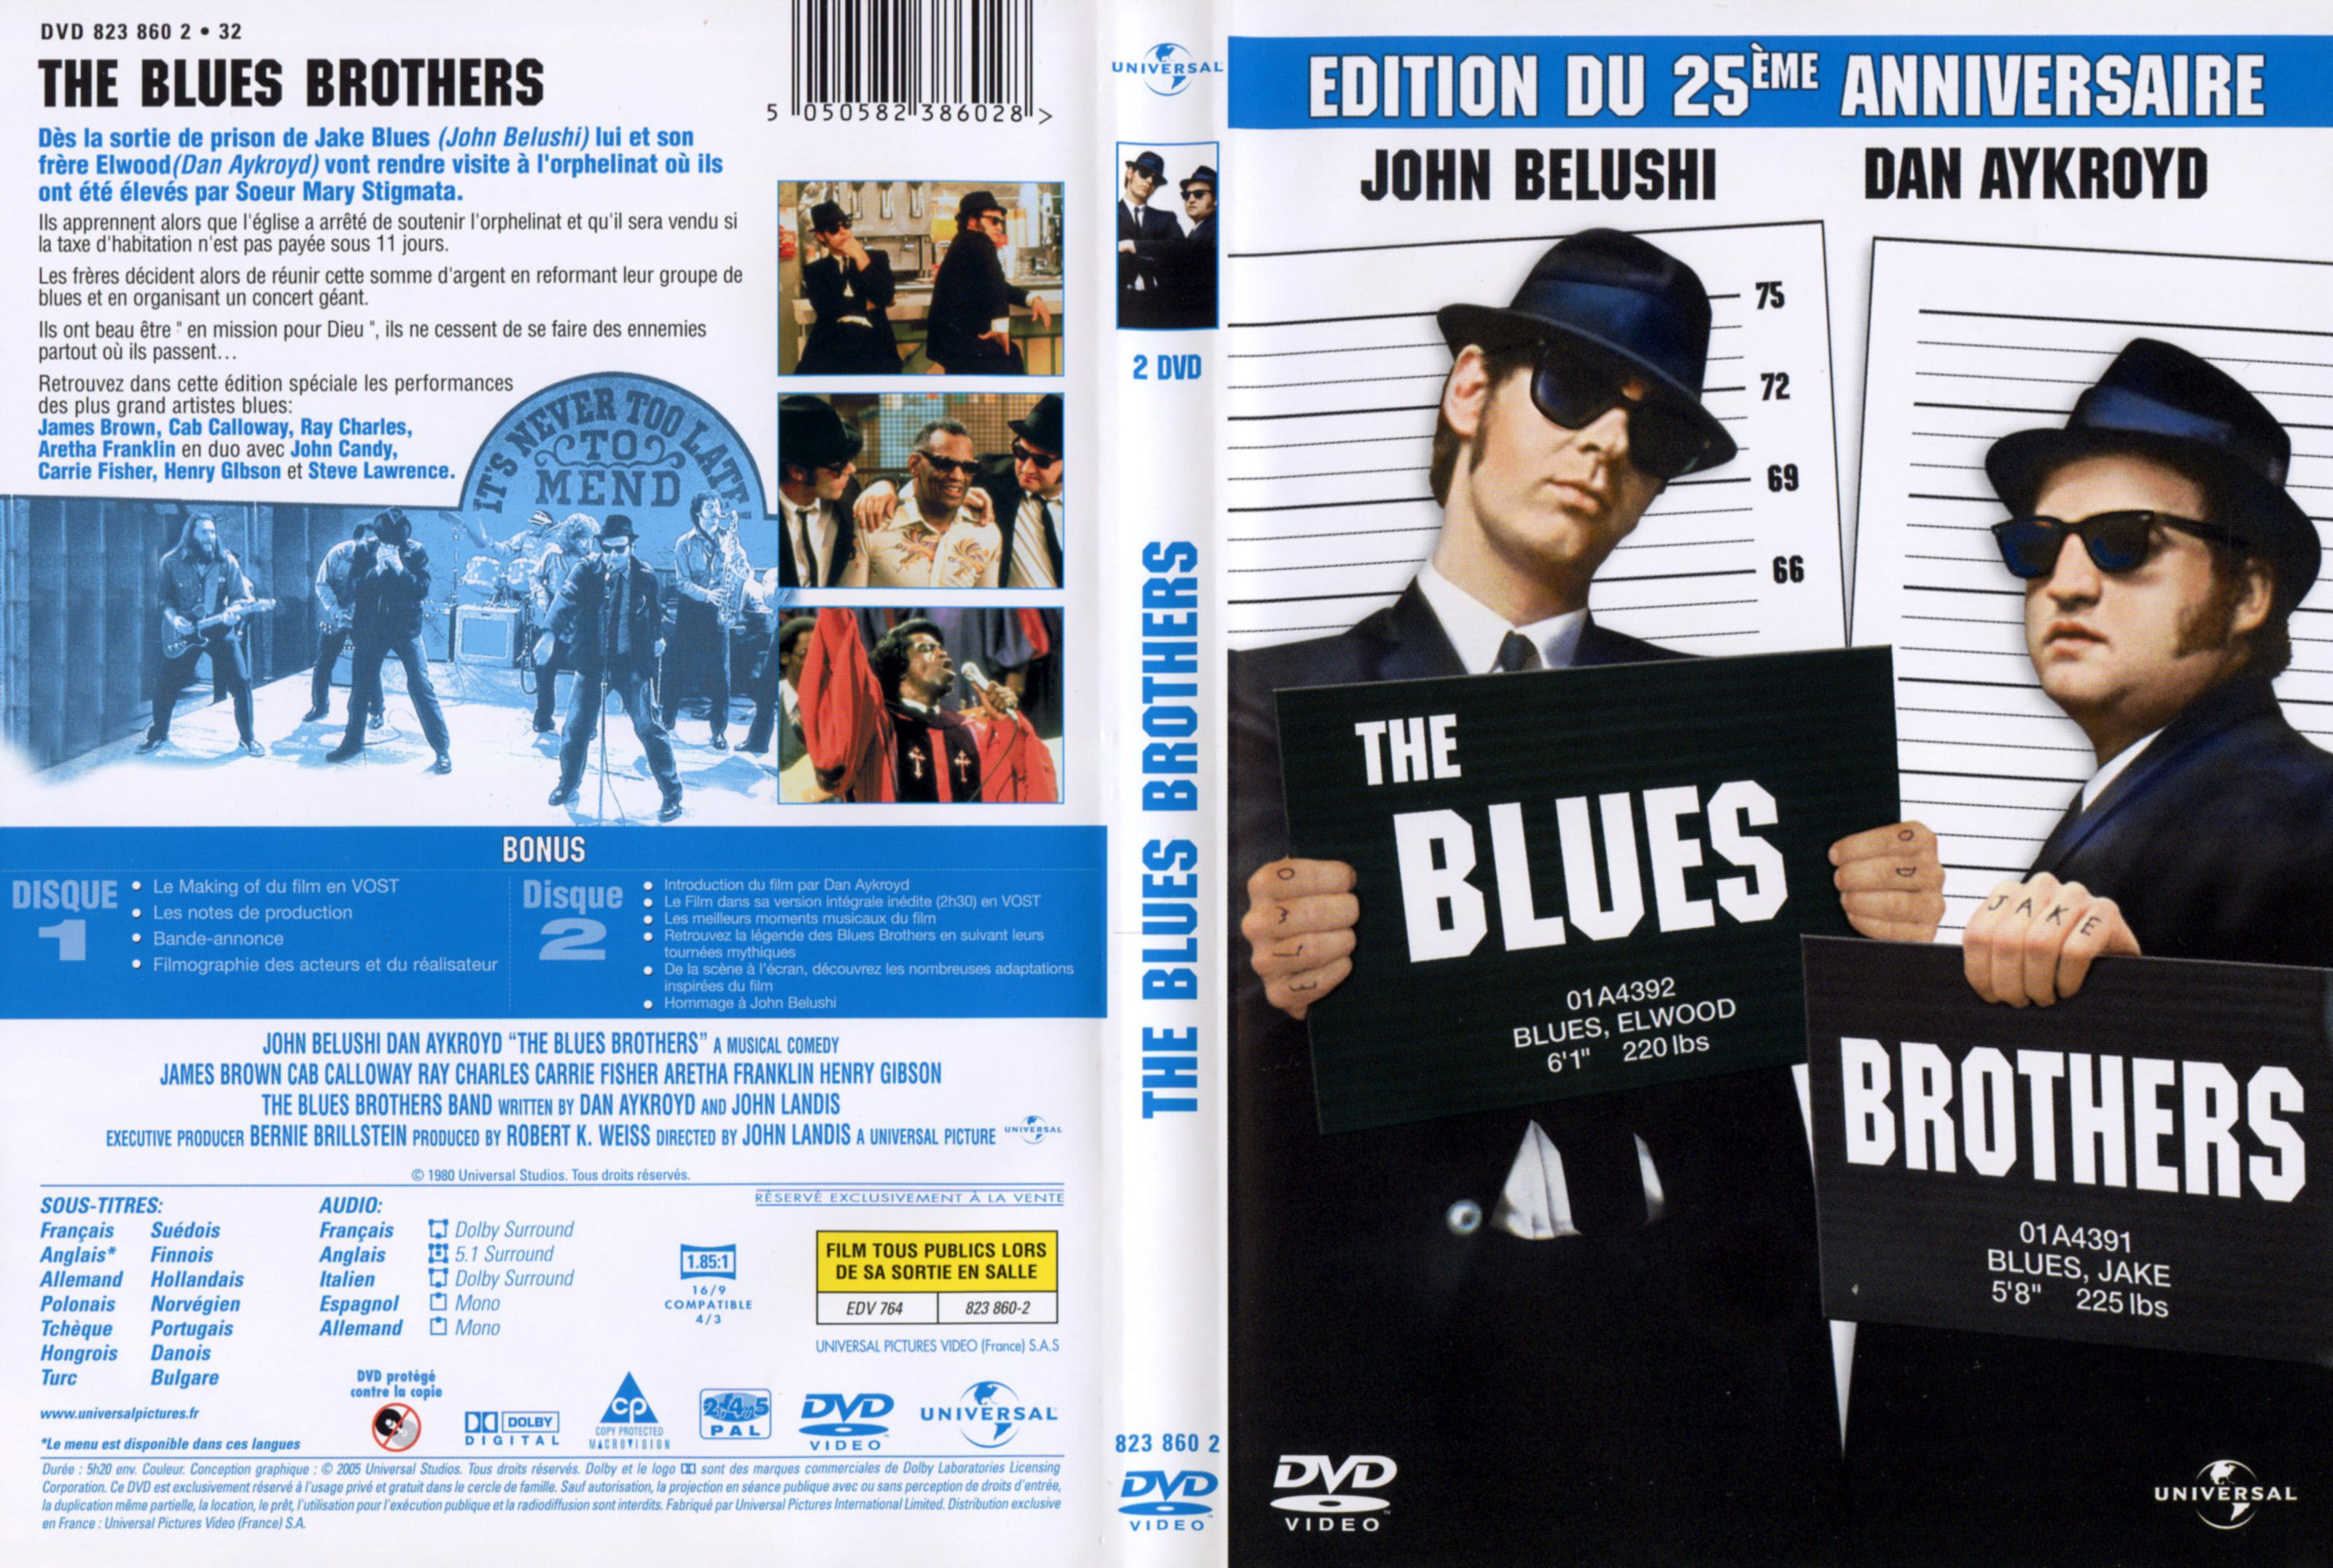 Jaquette DVD The Blues Brothers v4